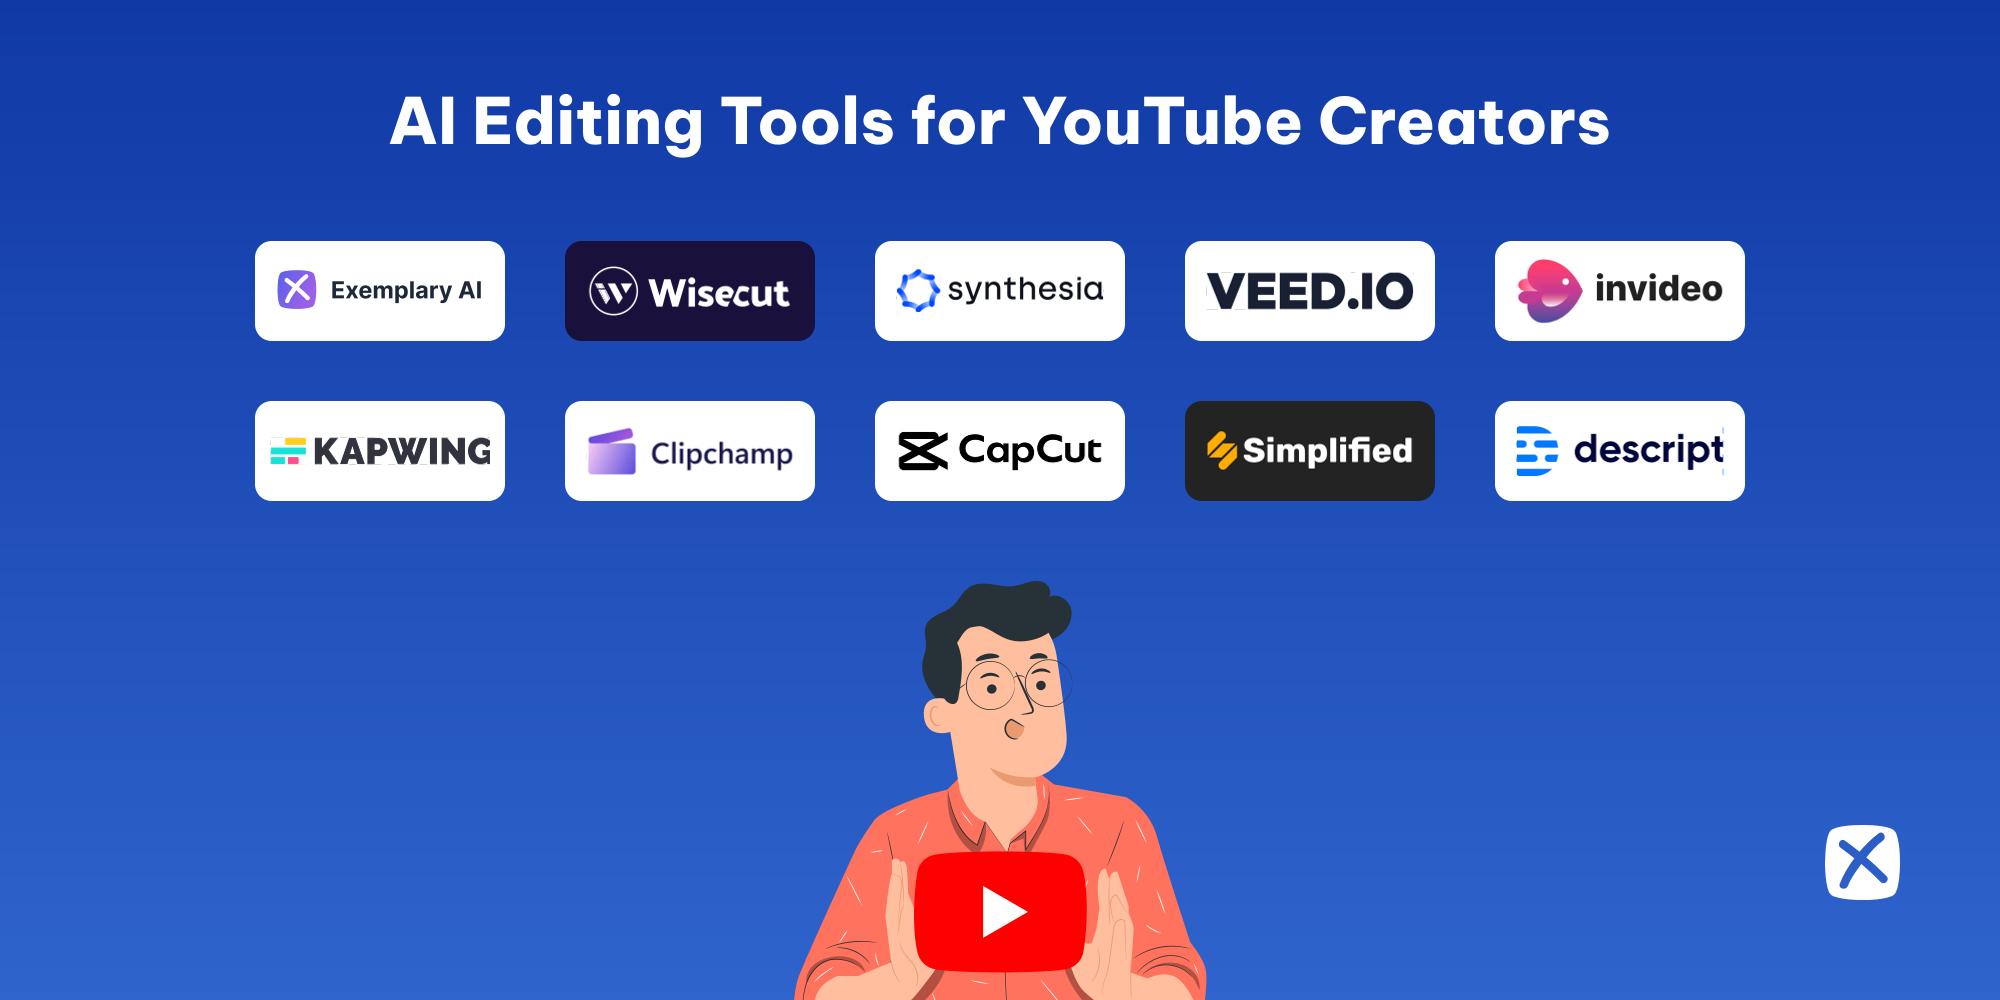 Ultimate Guide to the 10 Best AI Video Editing Tools For YouTube Creators